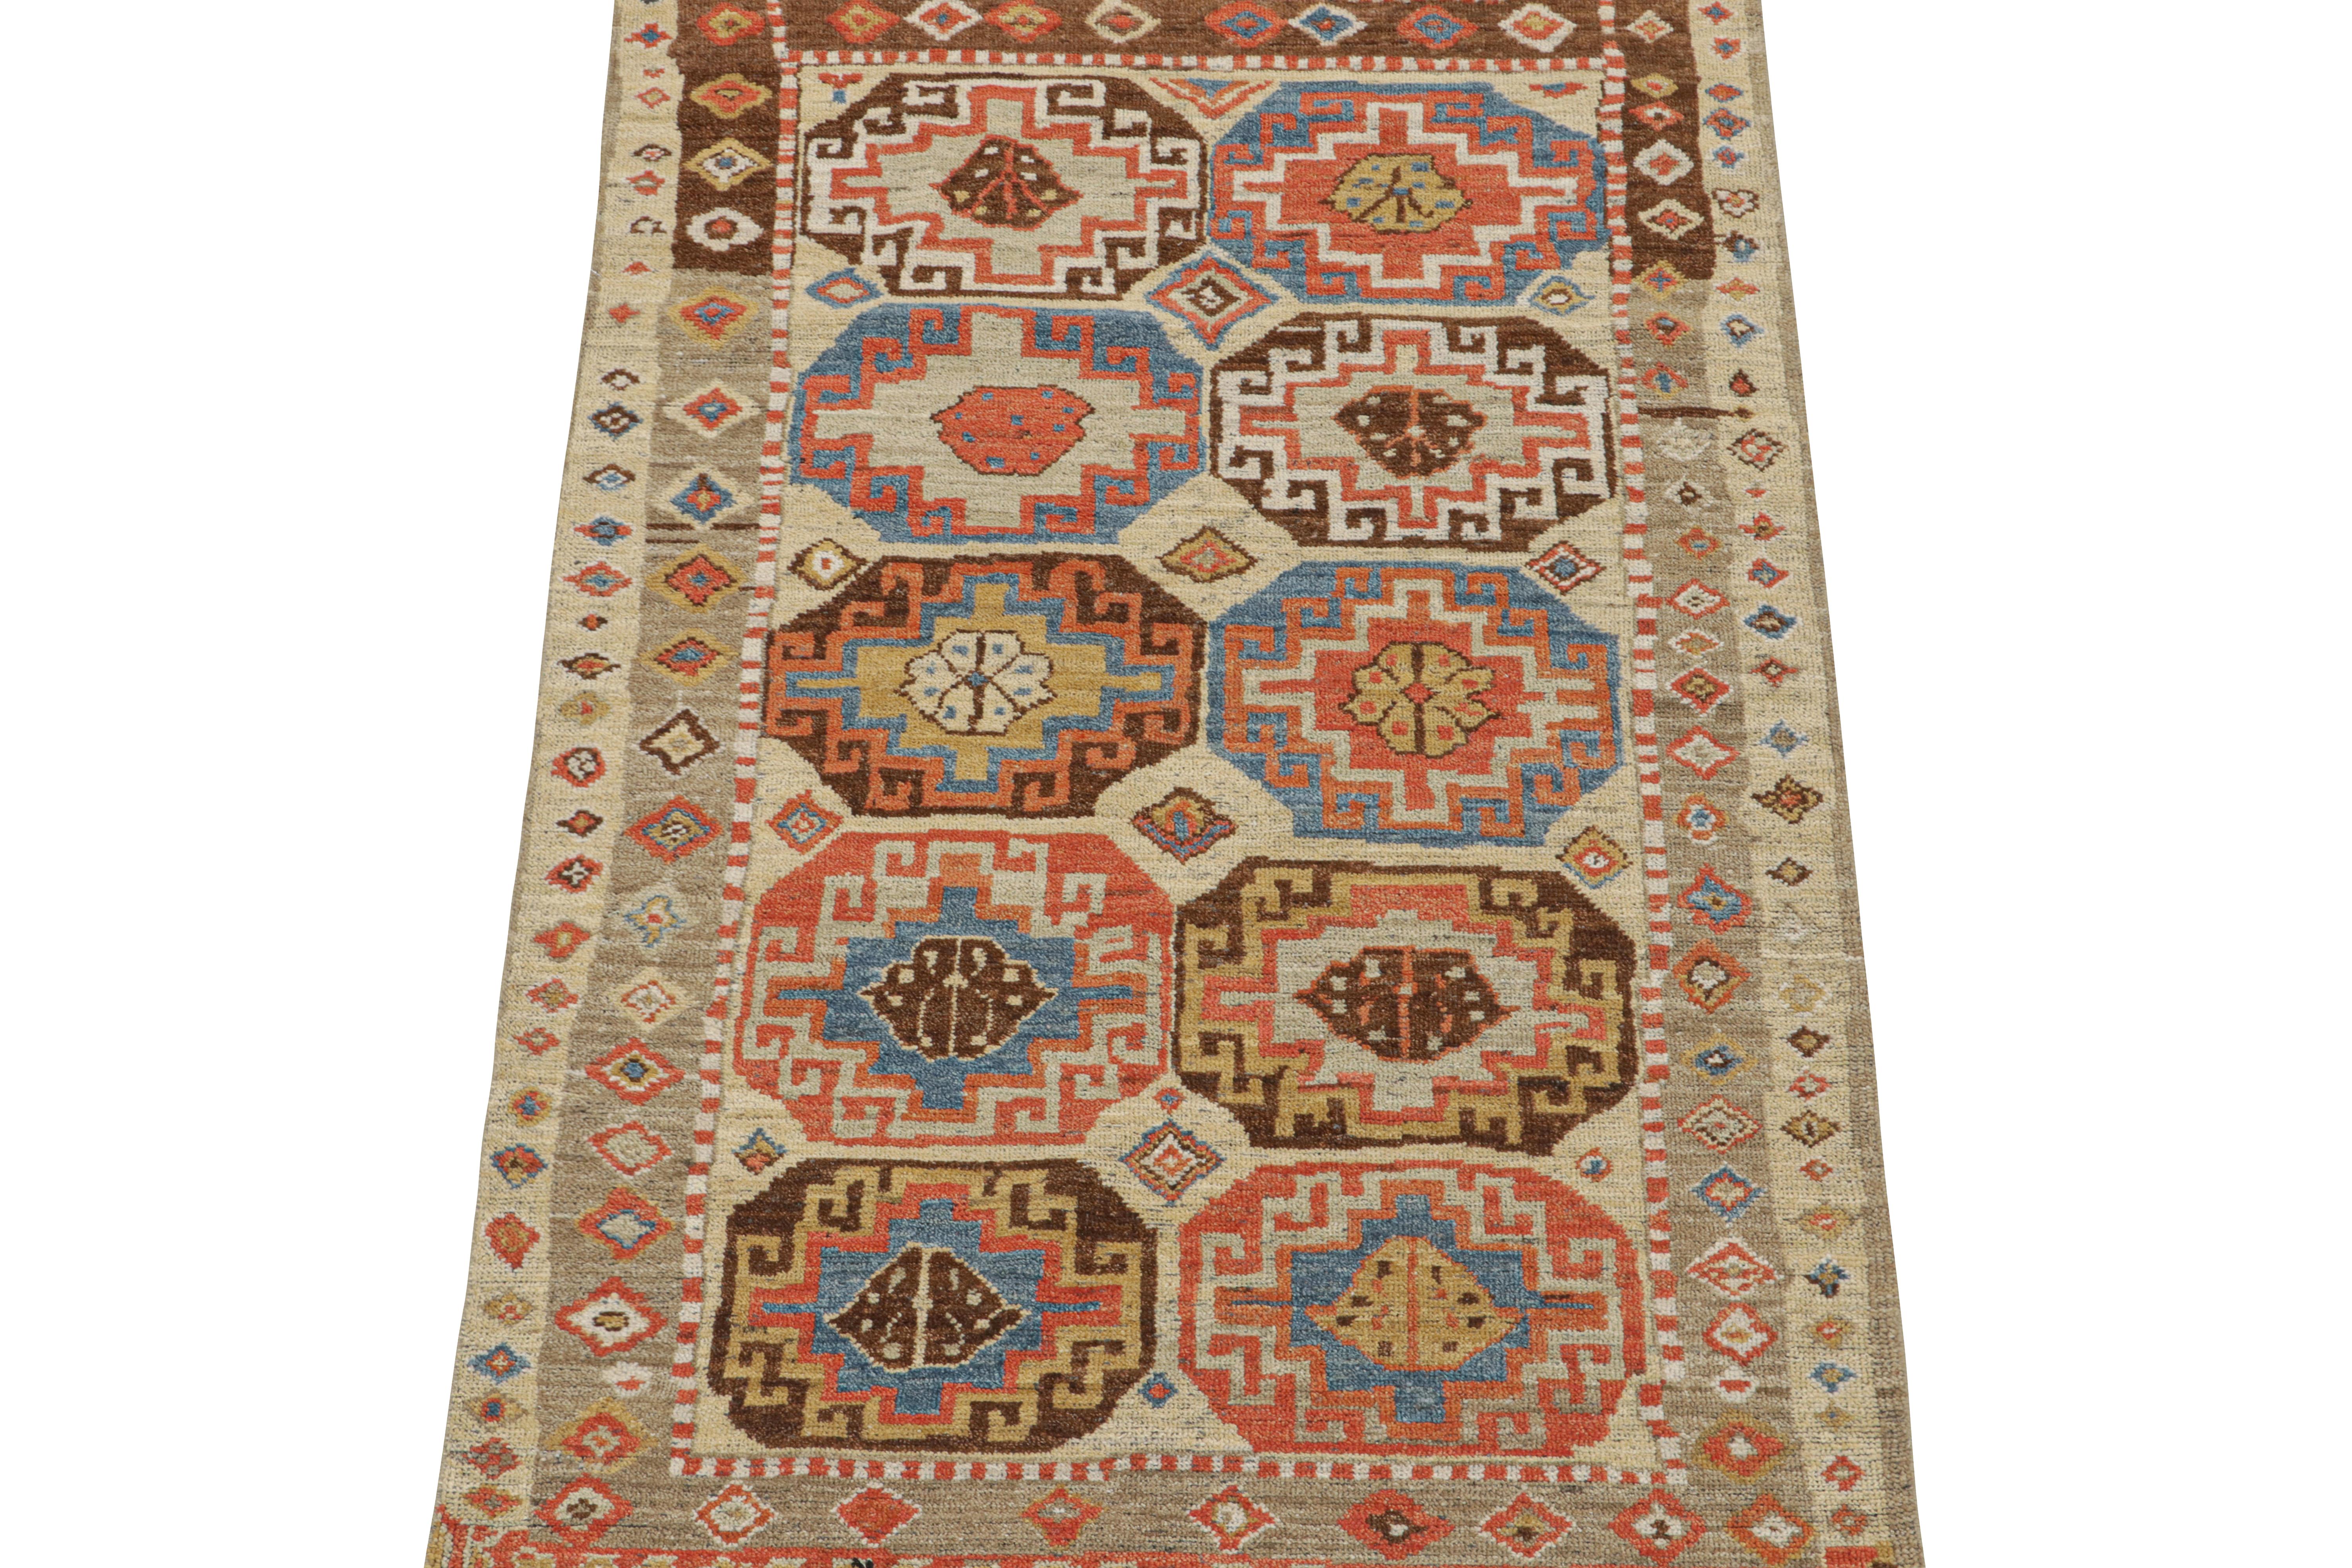 This 3x6 runner is a grand new entry to Rug & Kilim’s classics Burano collection. 

Hand knotted in wool, this particular design draws inspiration from antique tribal rugs with gul-style medallions and traditional geometric patterns. The colorway